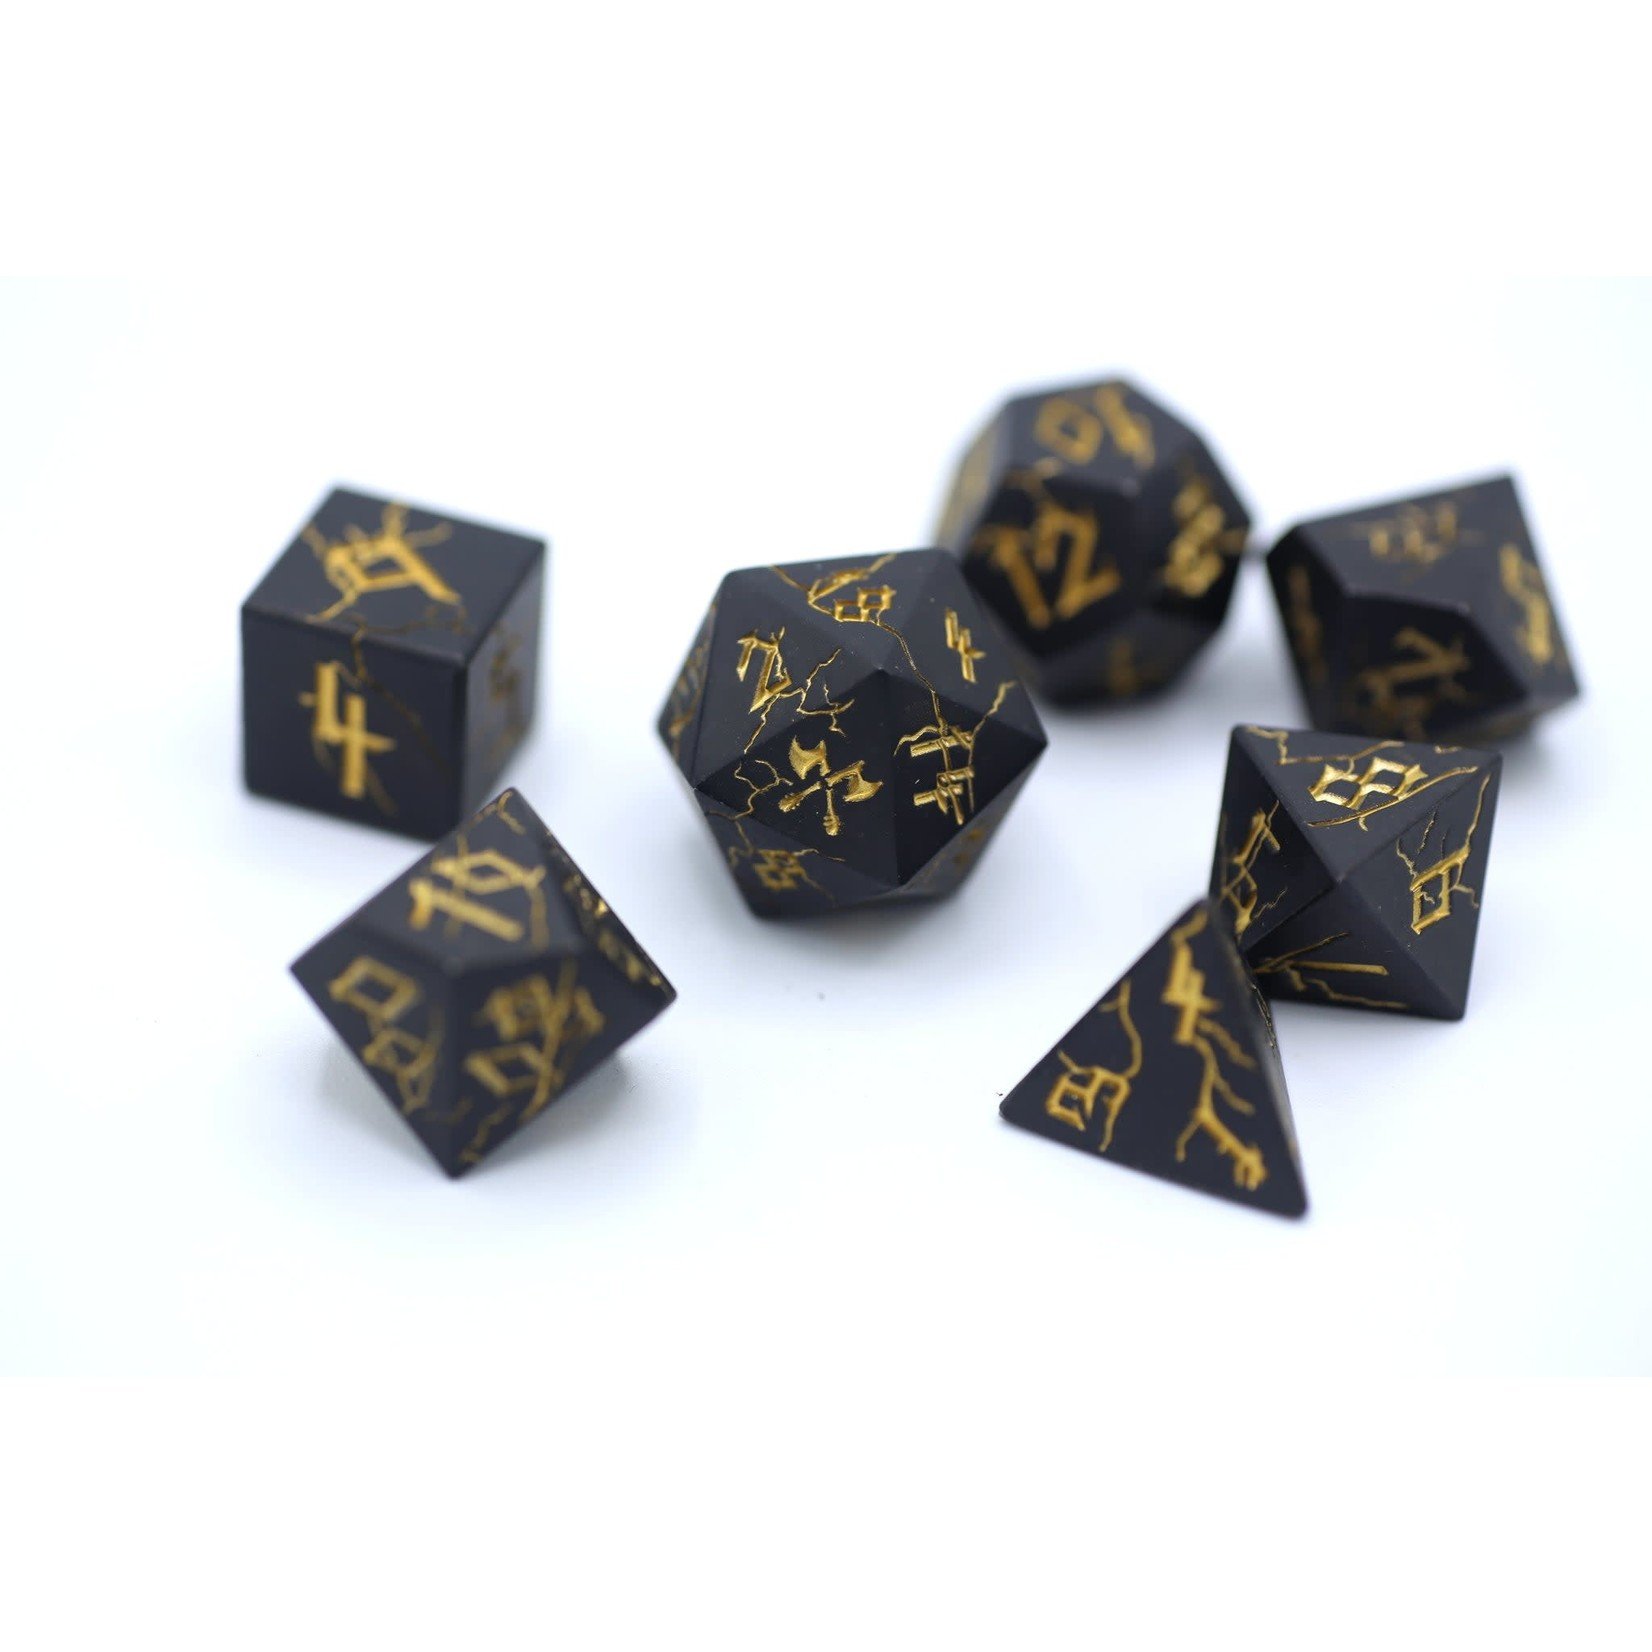 Hymgho Dice US 7-Piece Dice Set: Matte Black Metal in Barbarian Style